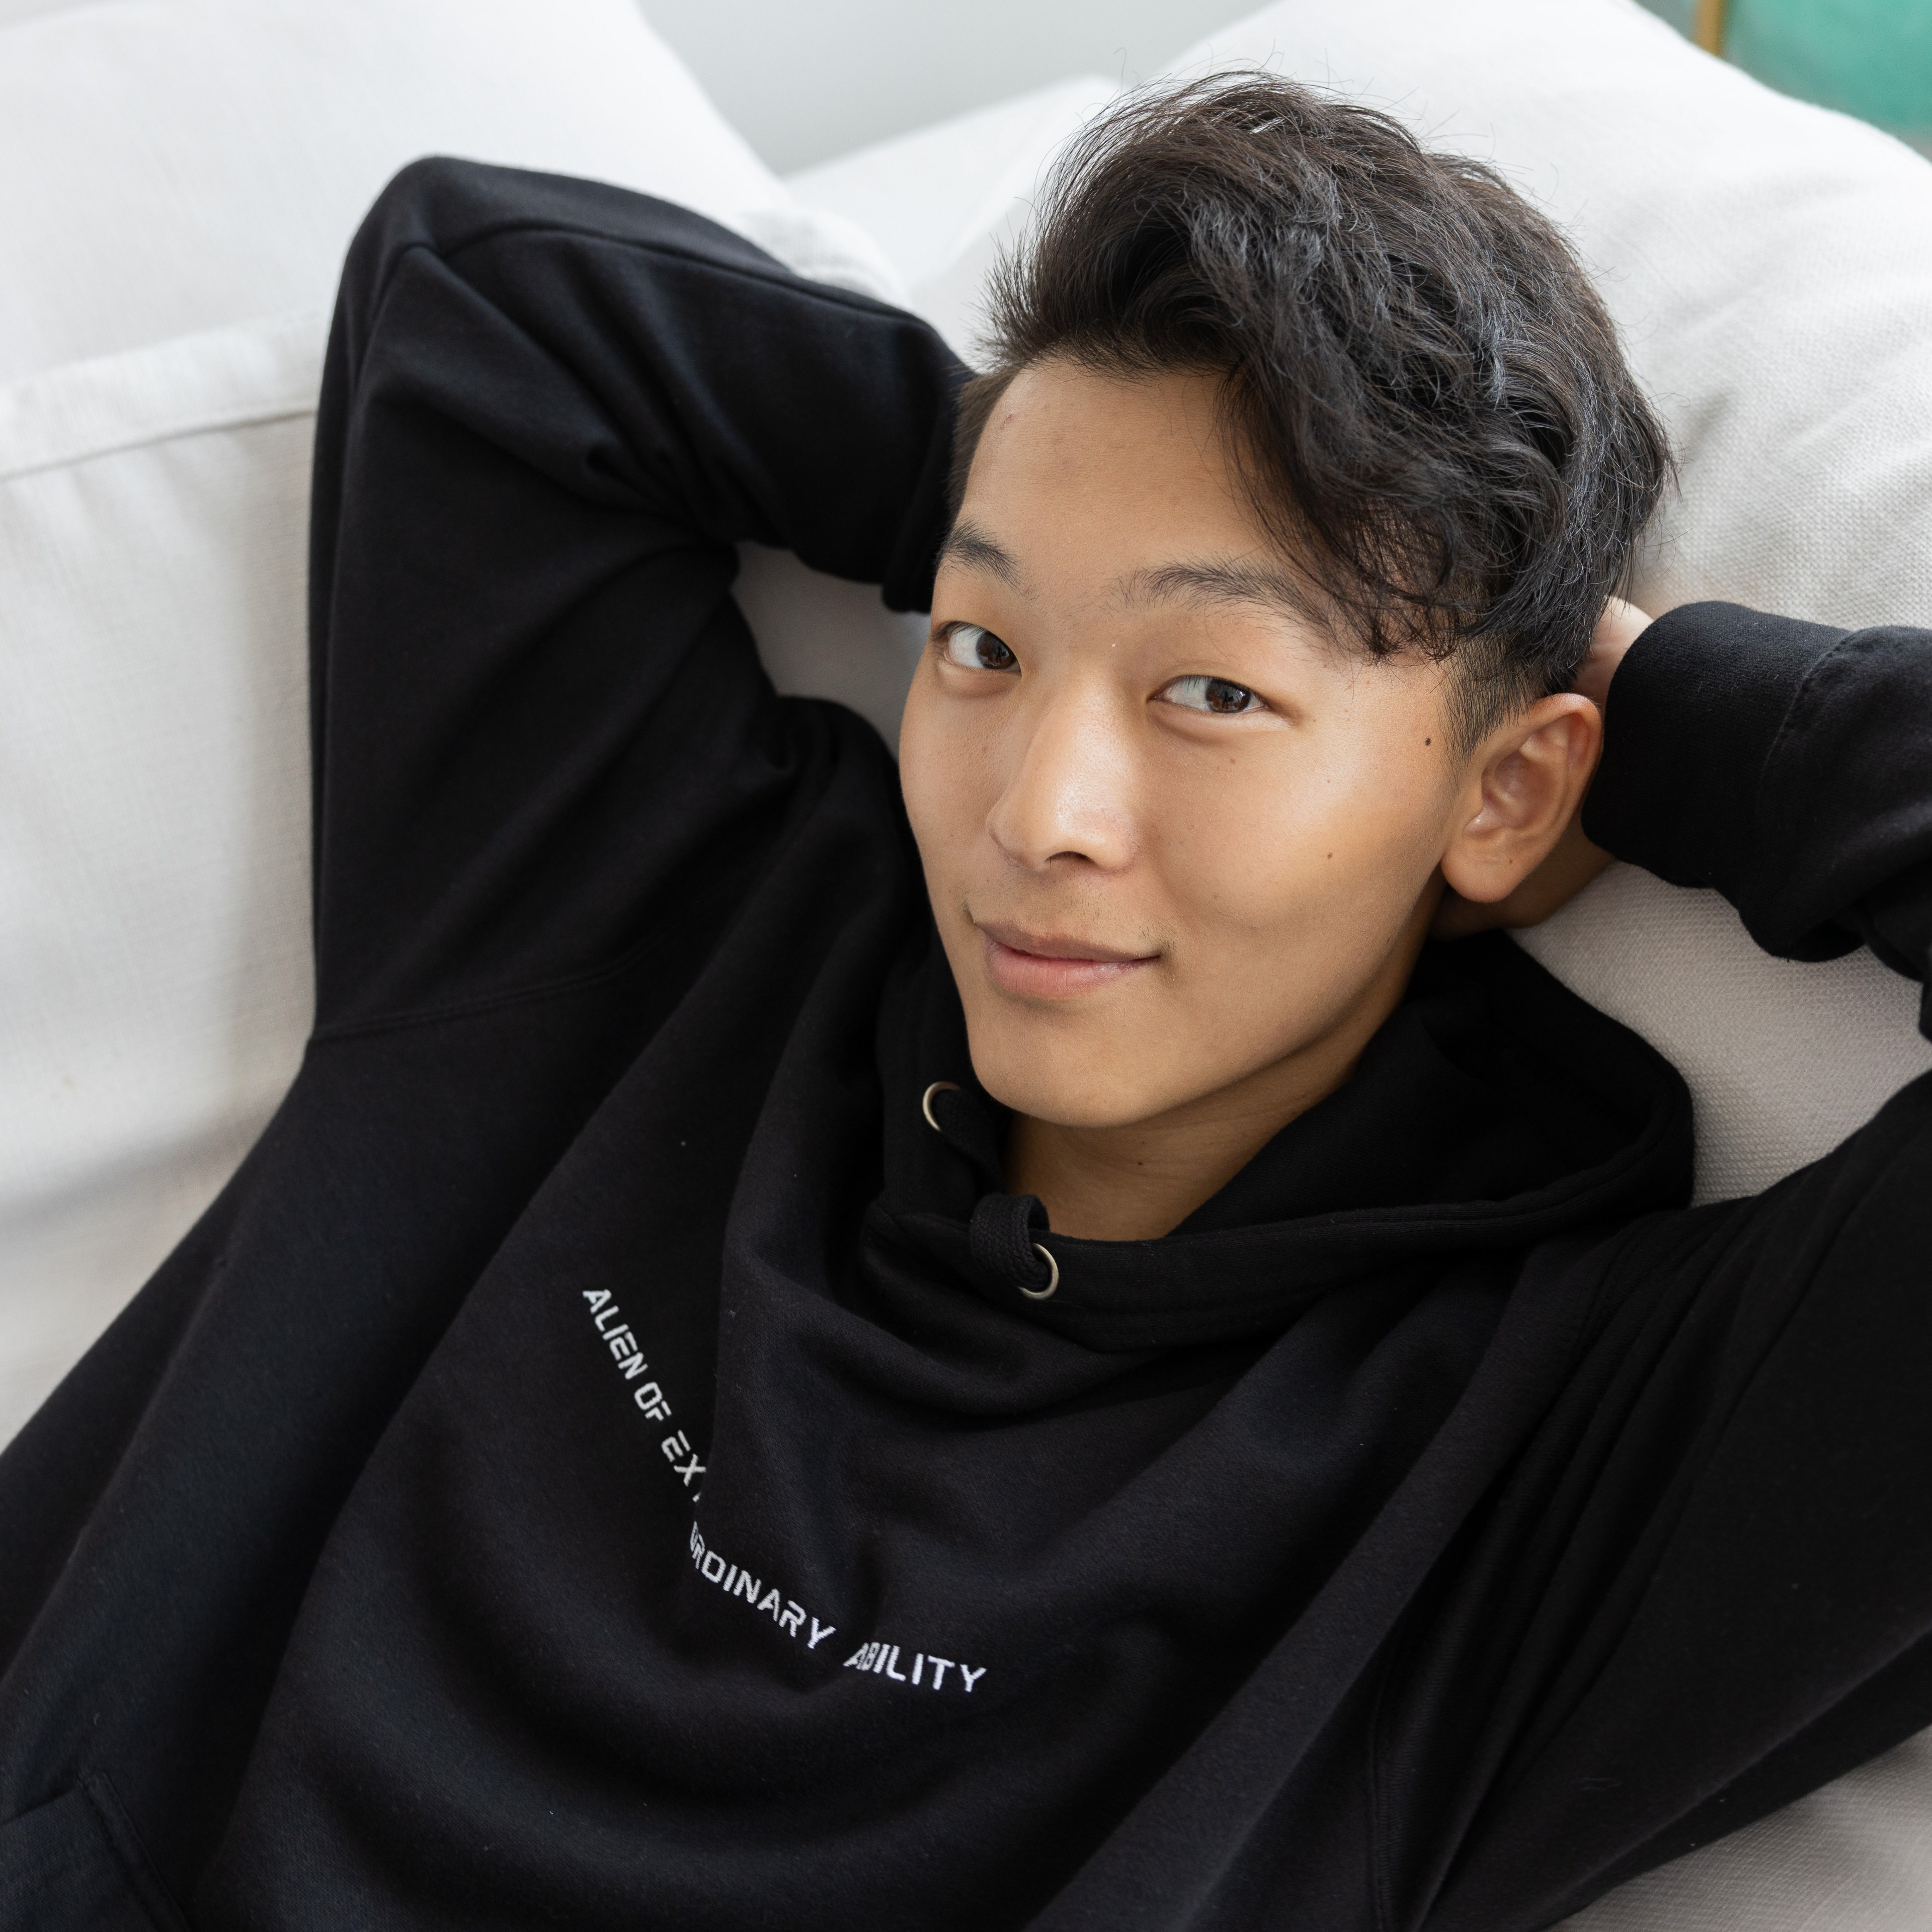 A young person with short hair, wearing a black hoodie with text on it, is lounging on a white couch, smiling with hands casually behind their head.